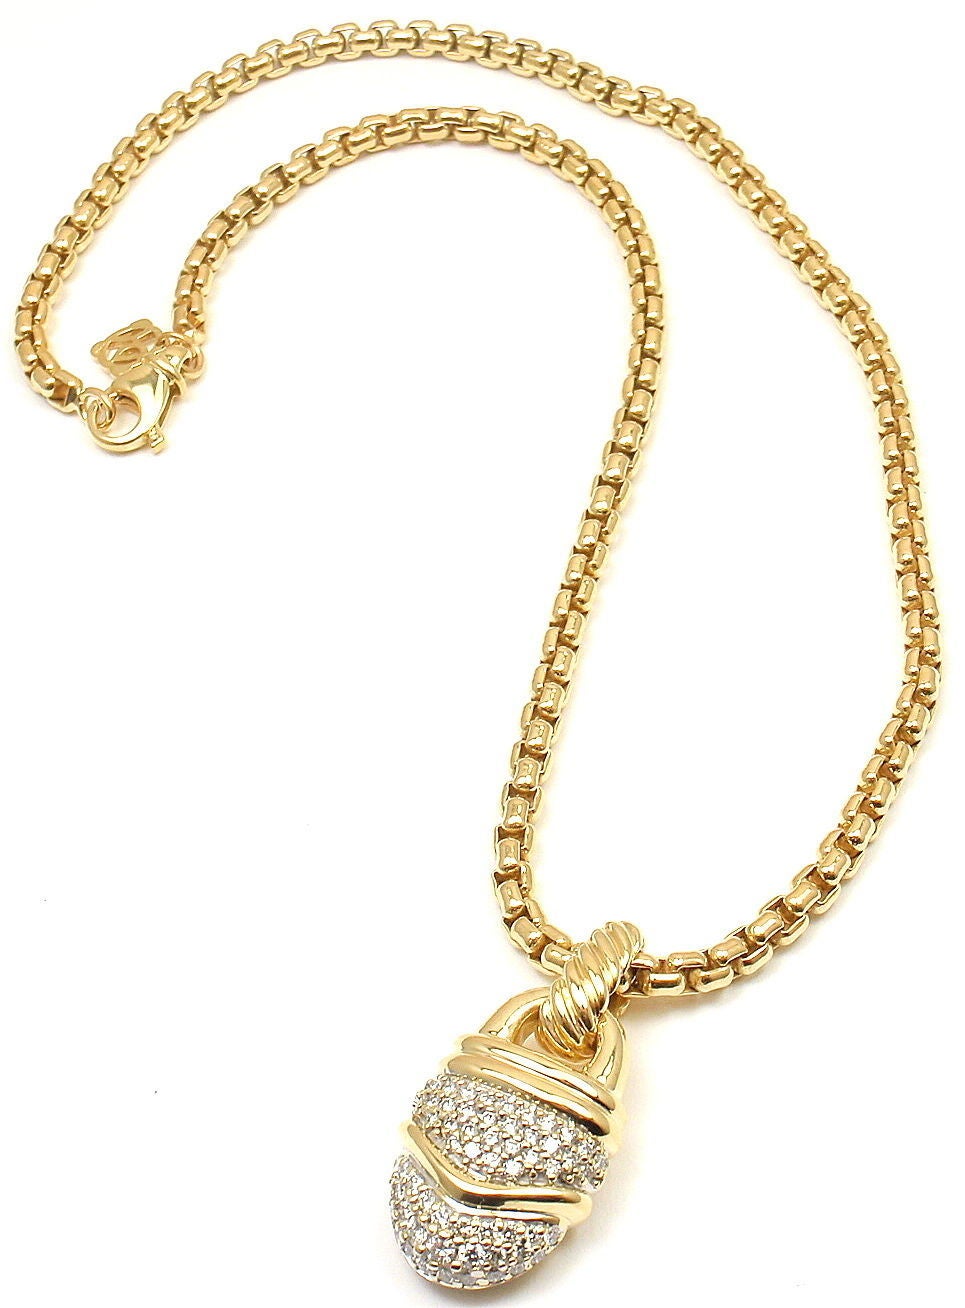 18k Yellow Gold Diamond Acorn Pendant Necklace by David Yurman.
With pave diamonds SI1 clarity, G color total weight approx .75-.95 ctw

Details:
Length: 16